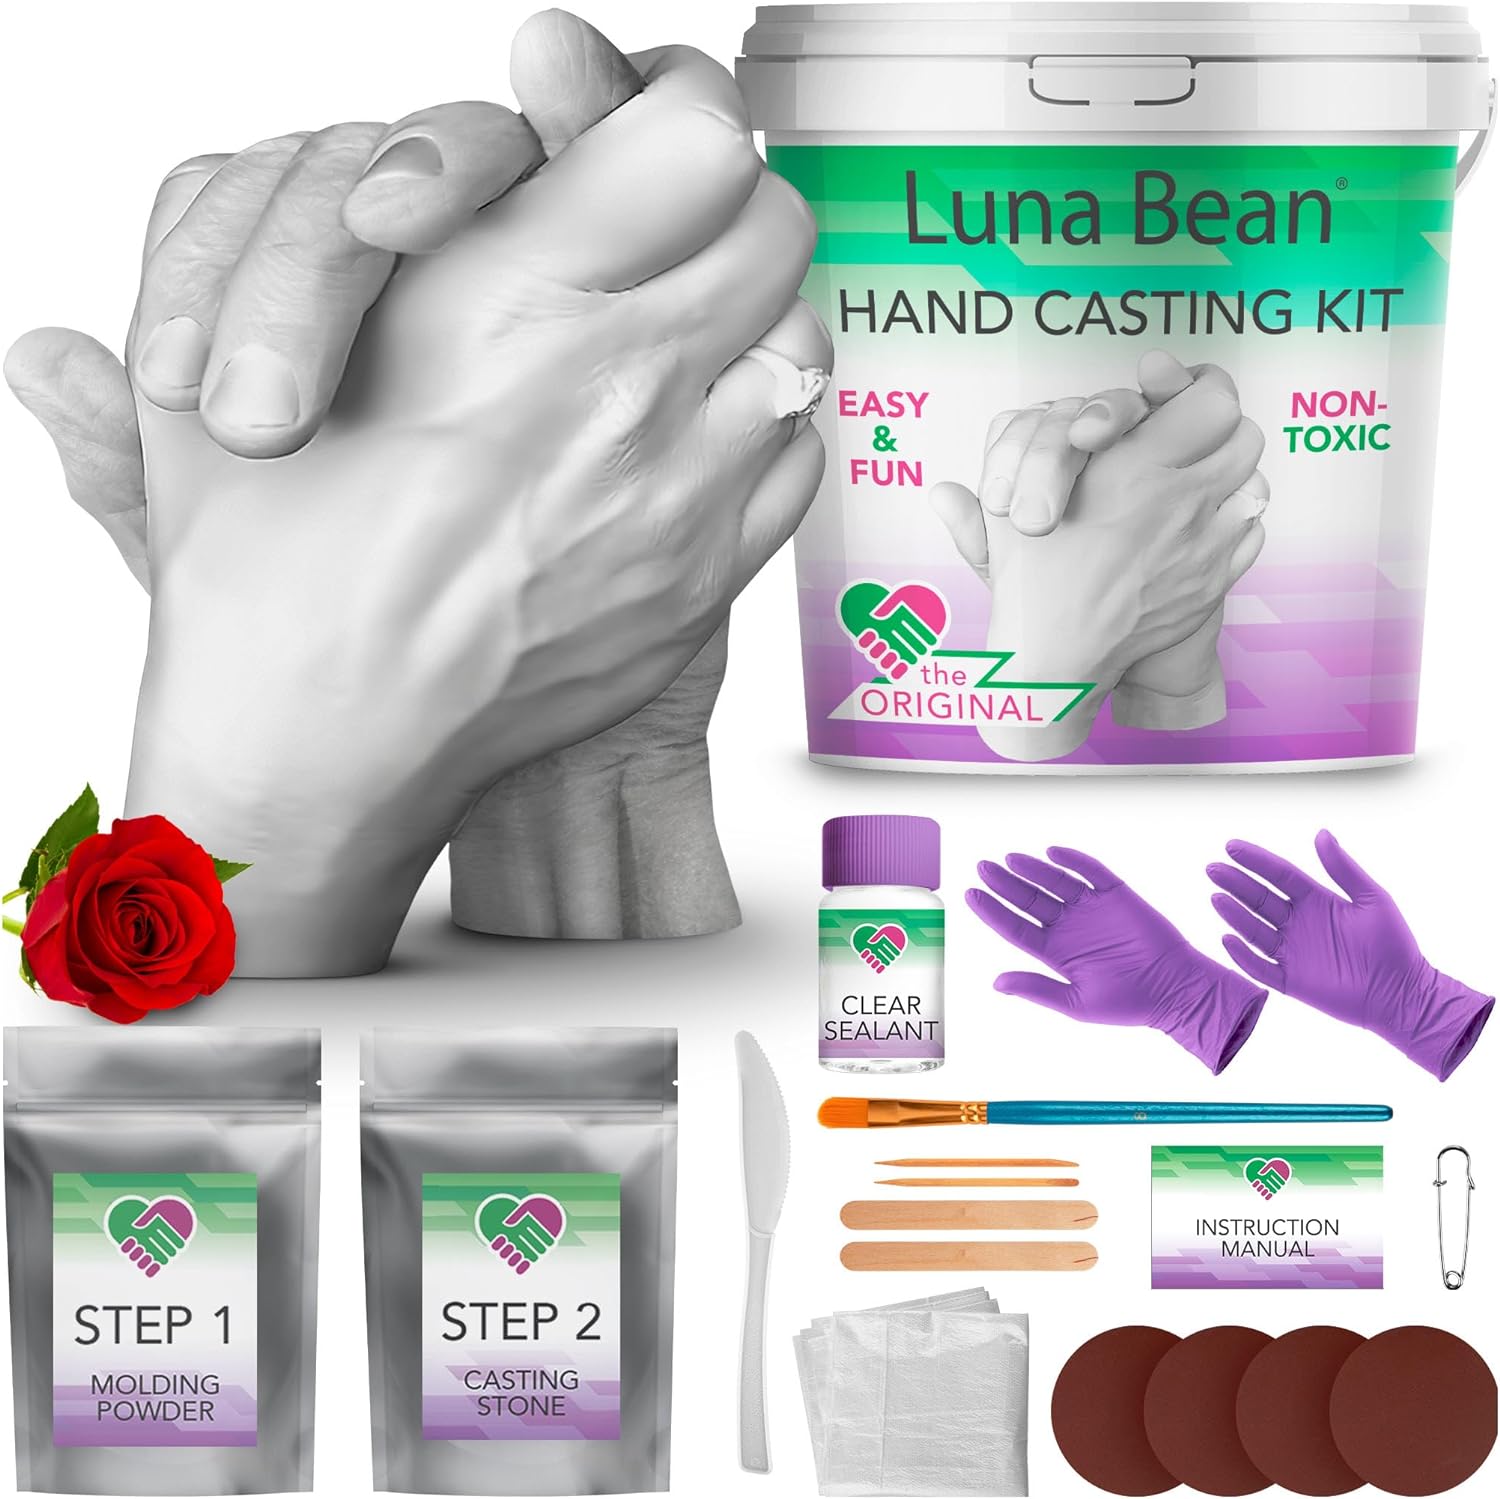 Capture Timeless Moments with Unique Hand Casting Kit